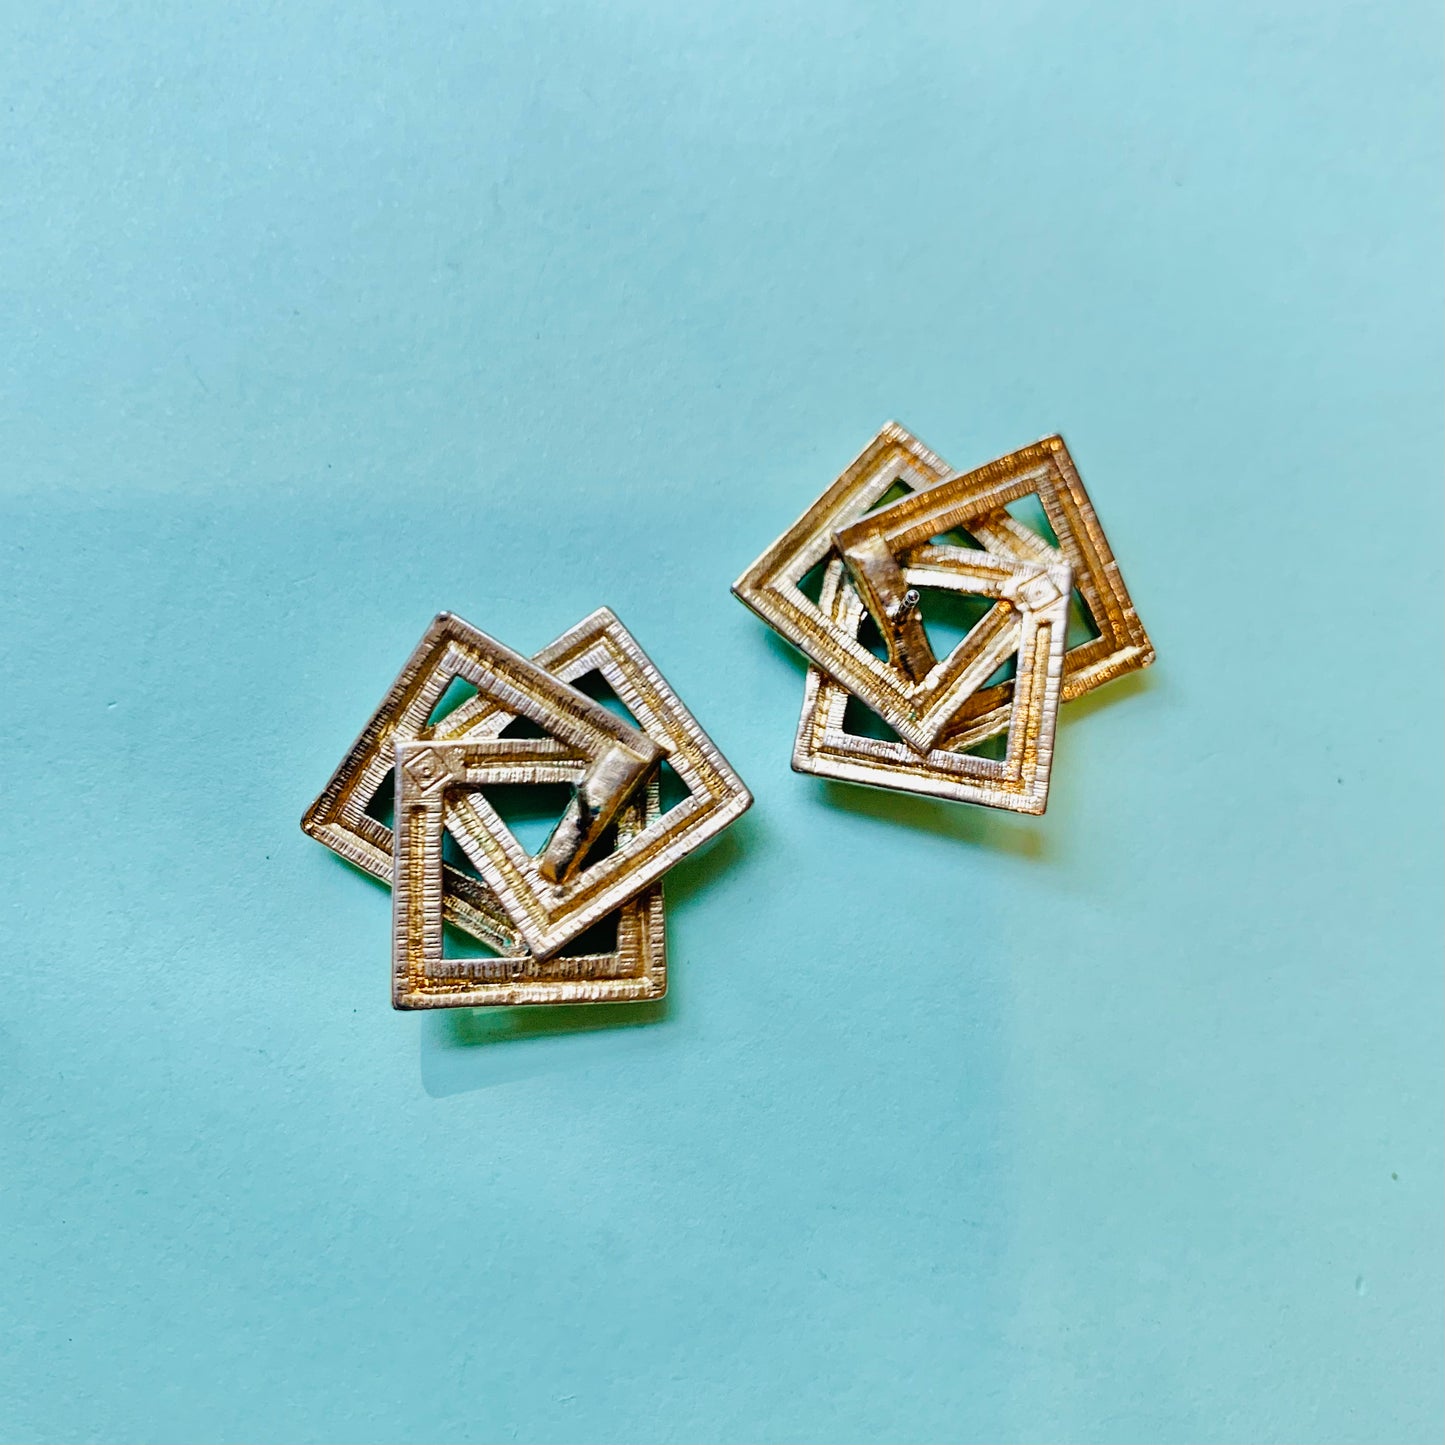 Rare 1960s French brass puzzle stud earrings